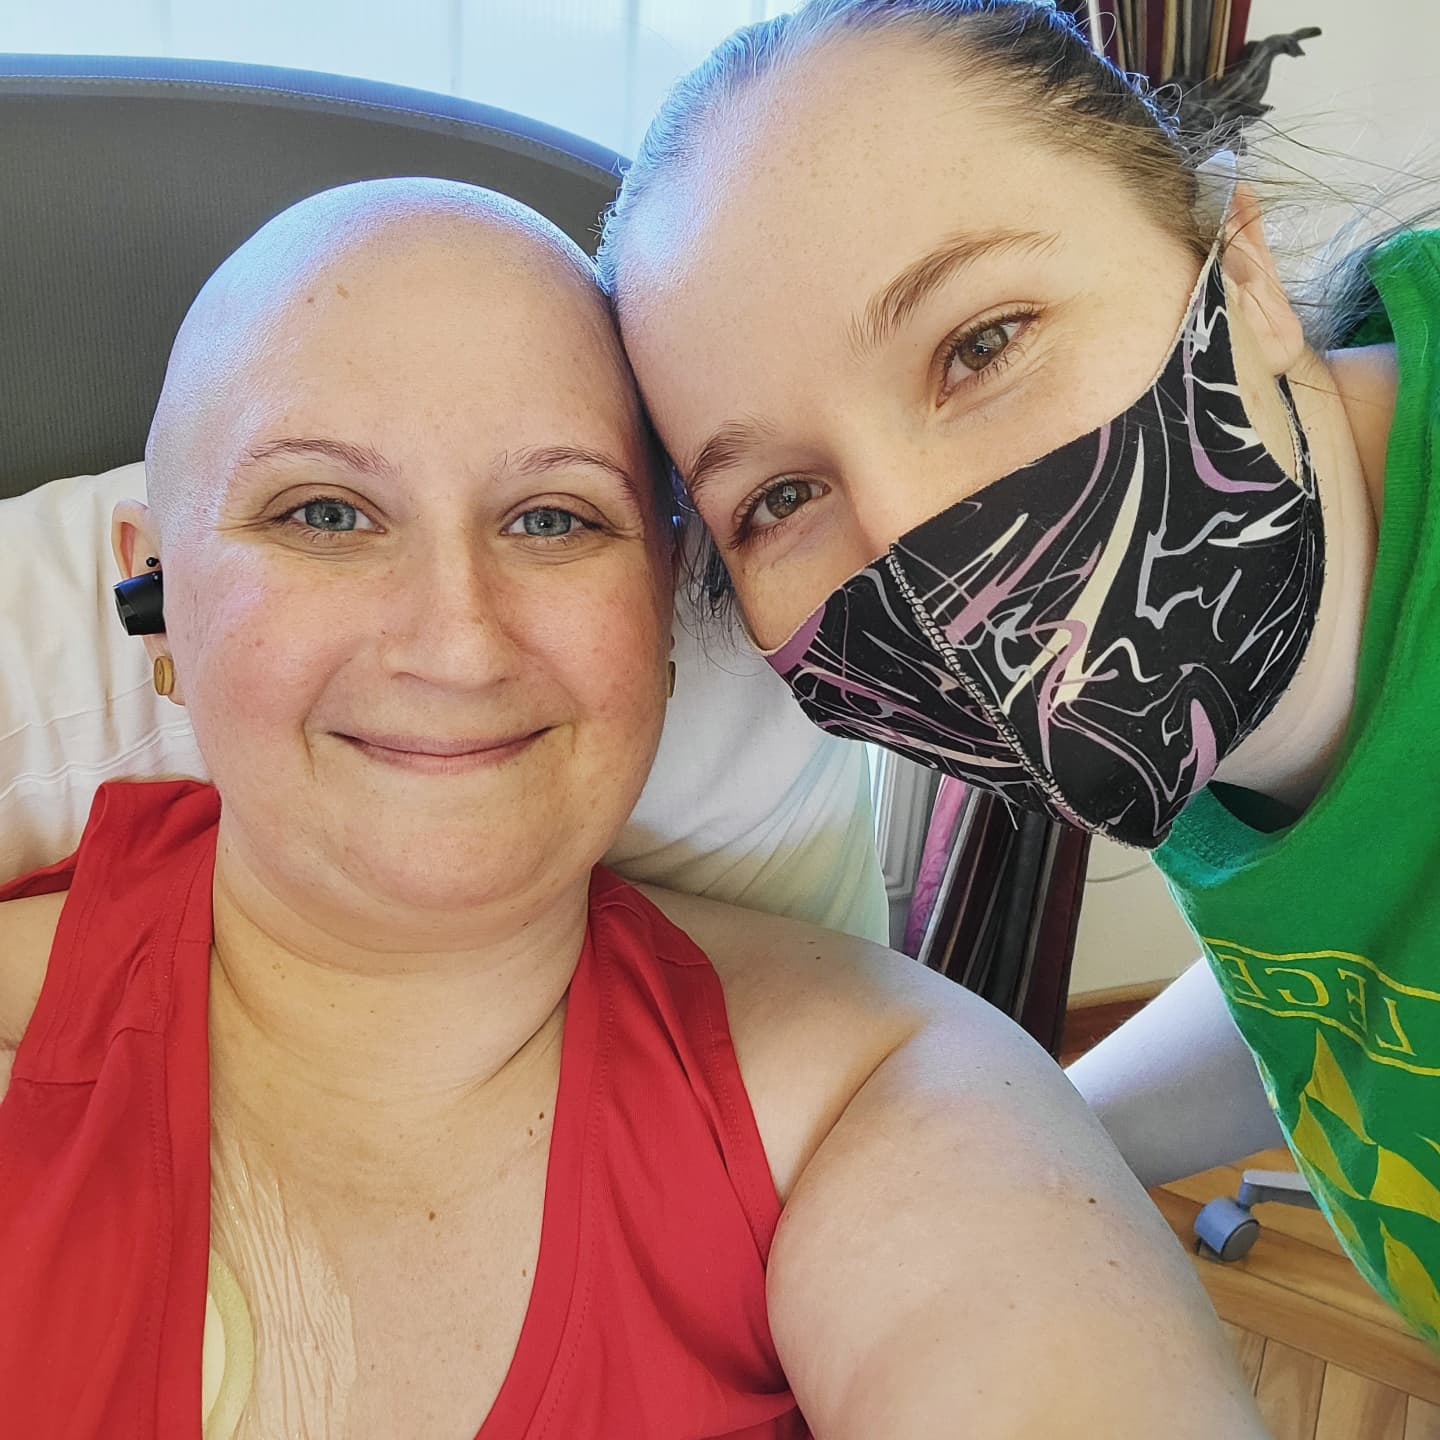 A picture of two women, one bald and in a red tank top, the other in a green shirt and a mask smiling for the picture during an infusion room.